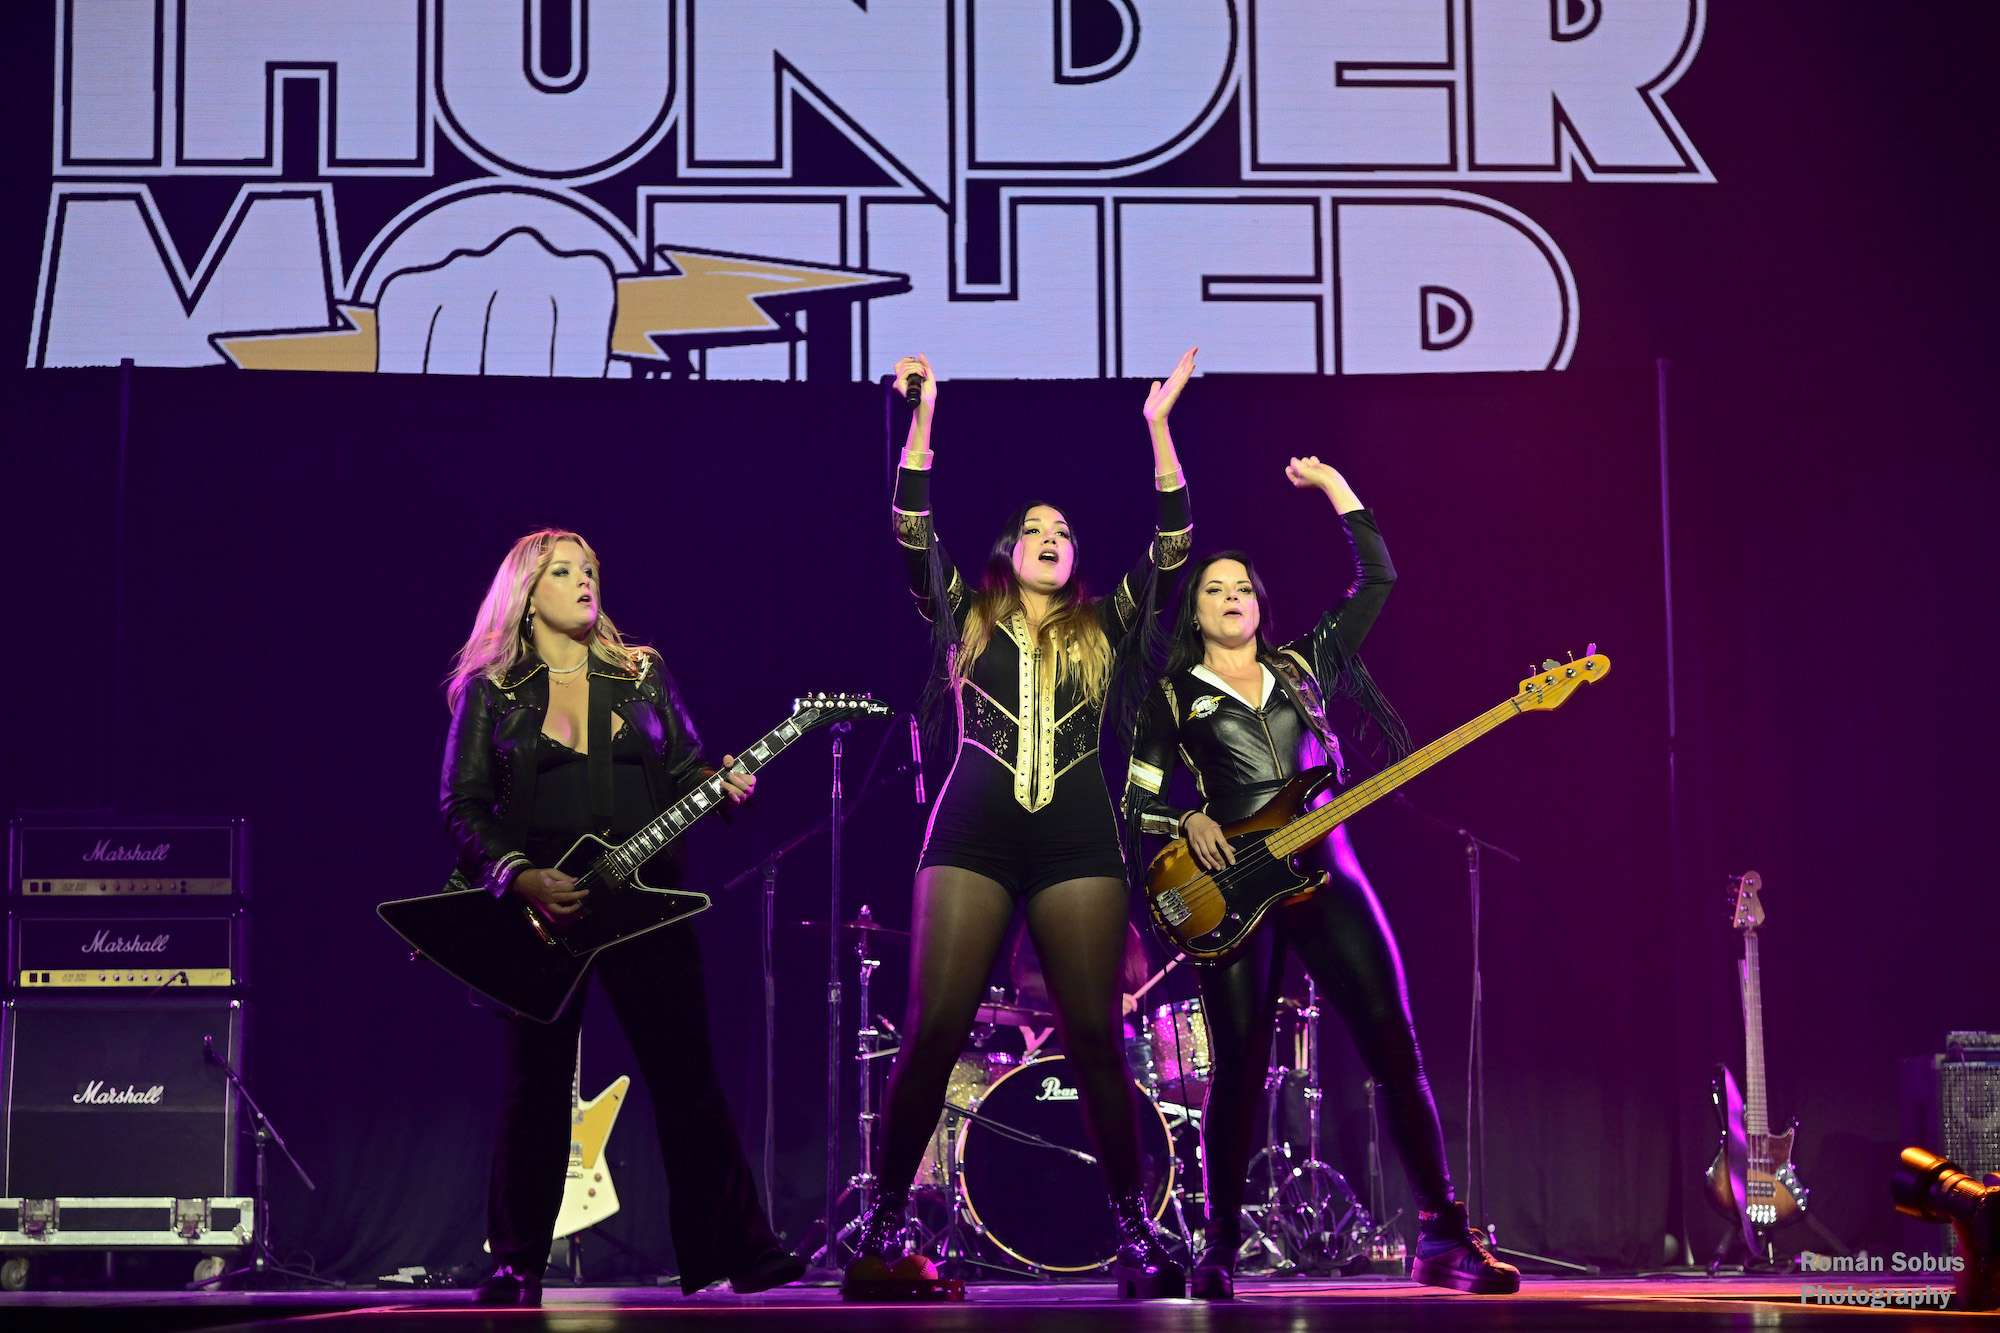 Thunder Mother Live at Allstate Arena [GALLERY] 10